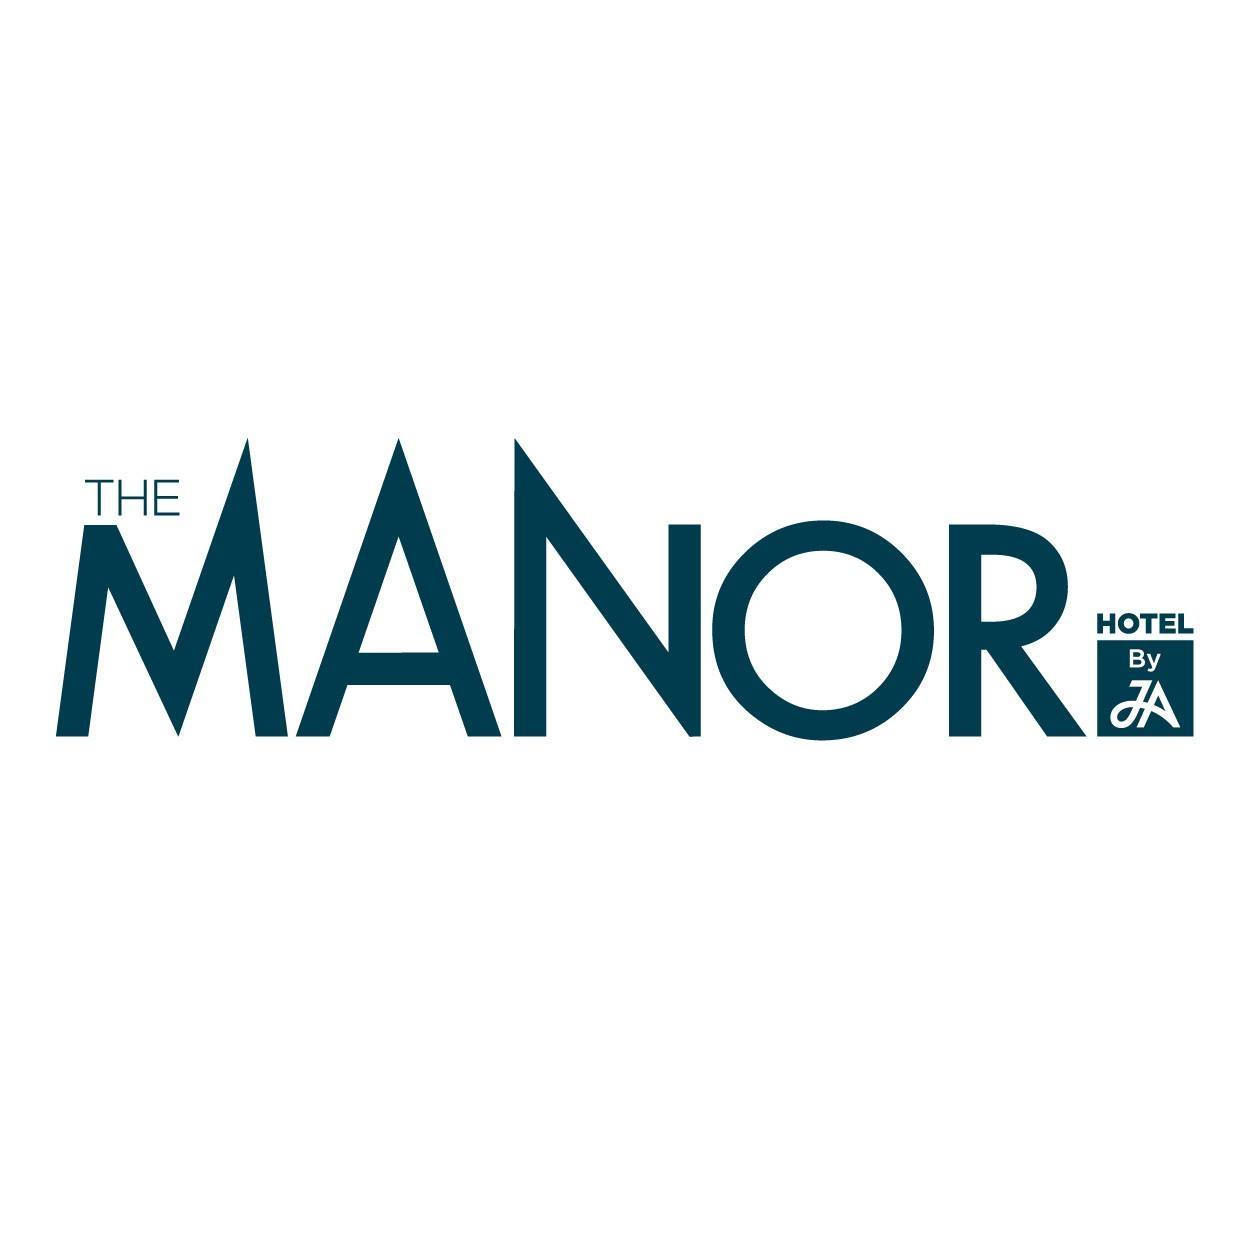 Image result for The Manor Hotel by JA